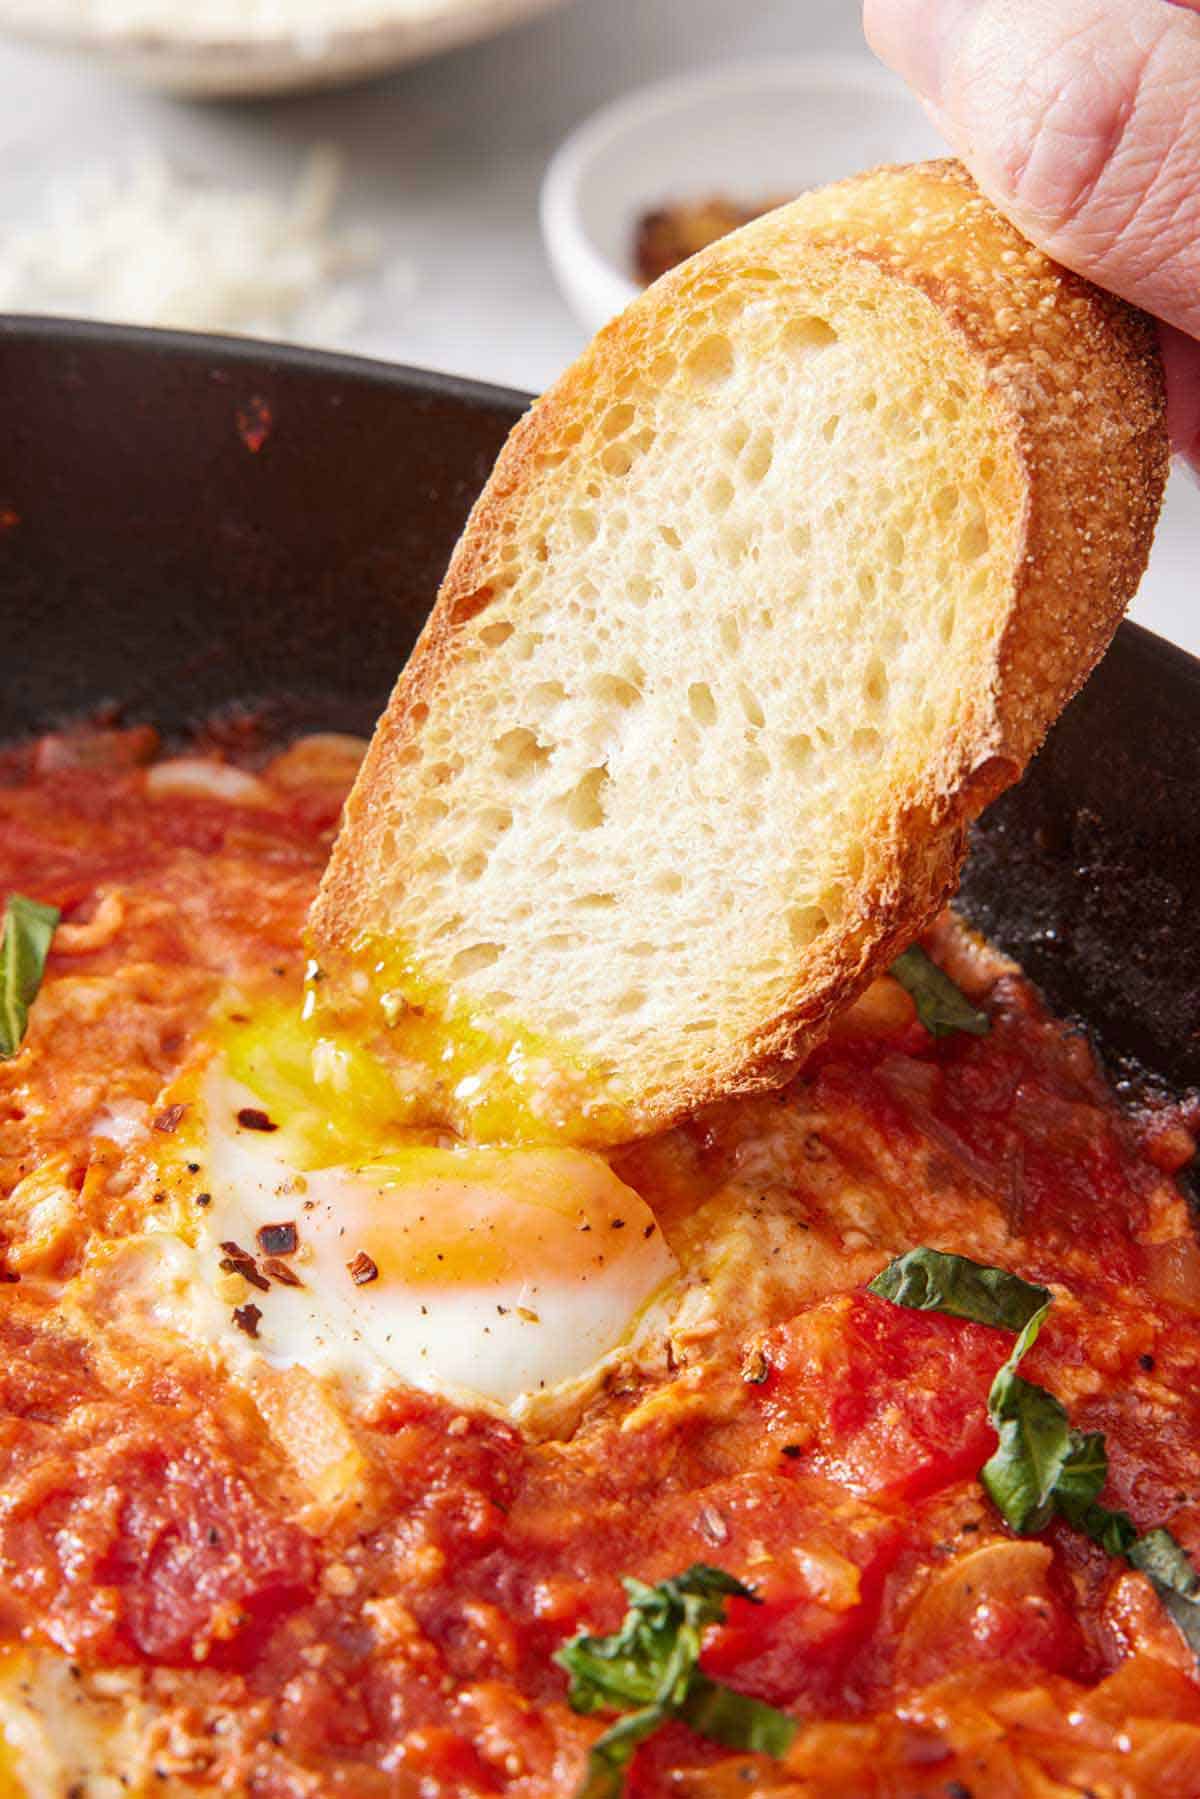 A piece of bread dipped into an egg yolk in a skillet of eggs in purgatory.